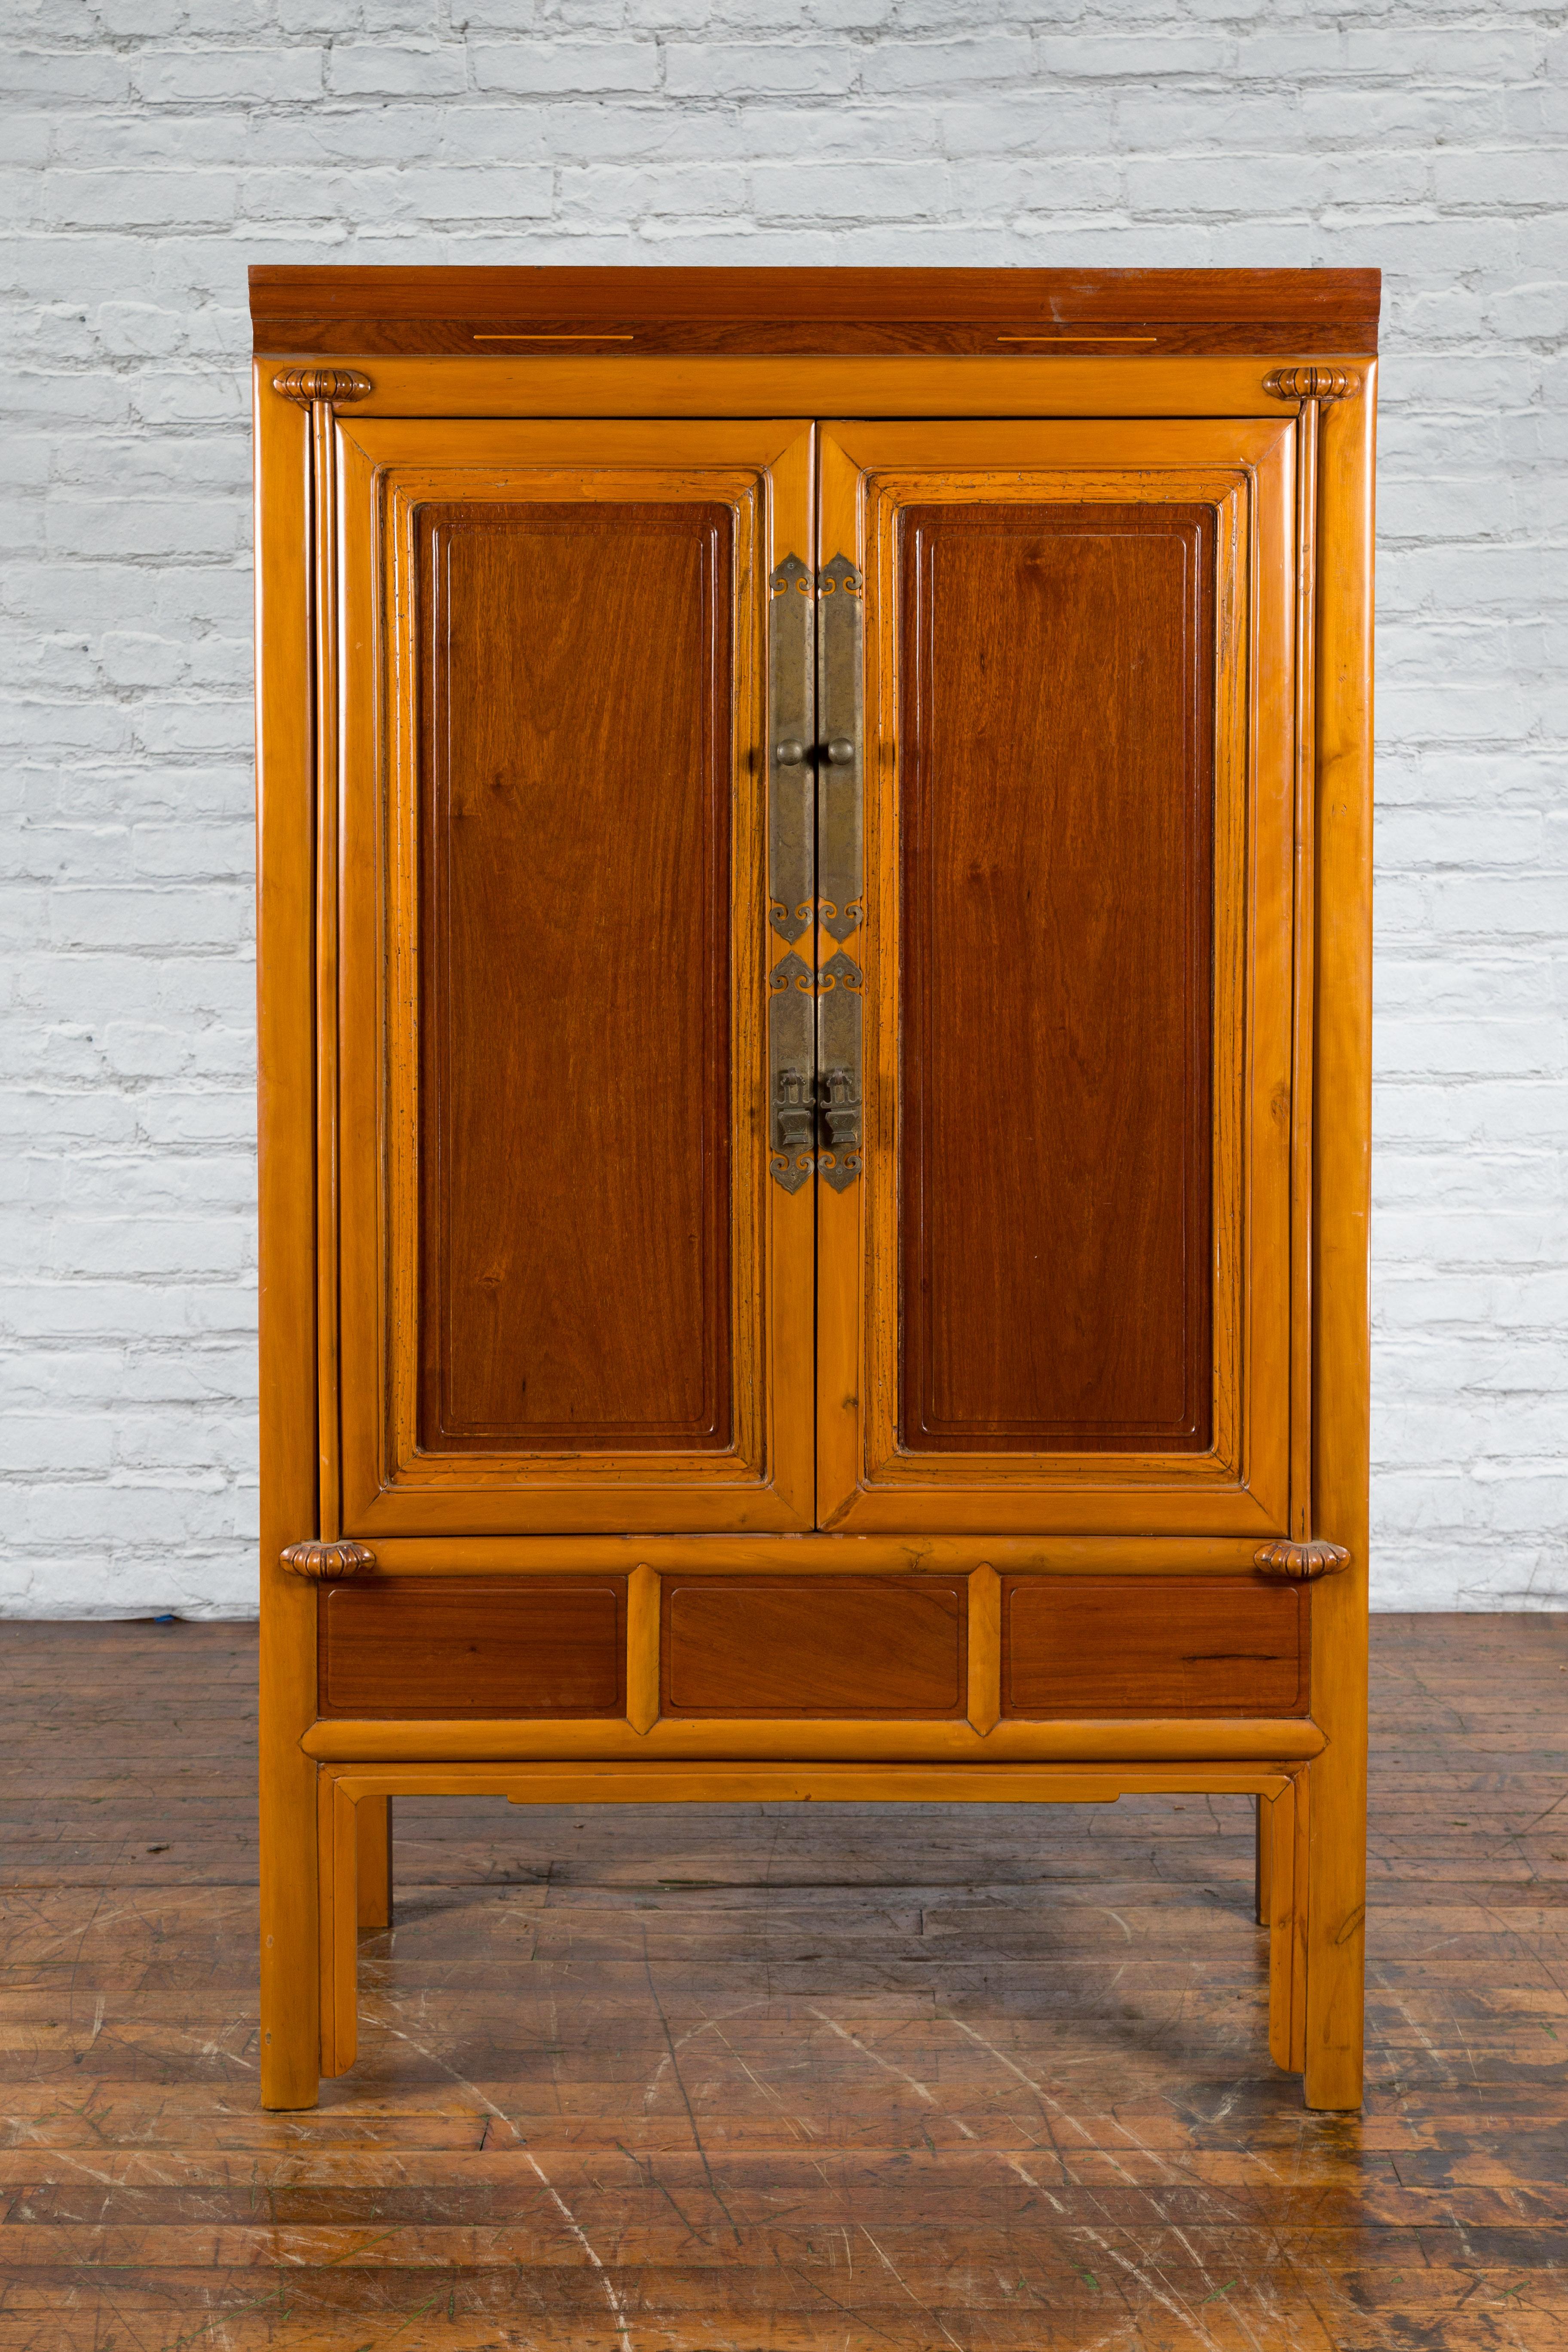 A Chinese Qing Dynasty period two-toned wooden cabinet from the 19th century, with brass hardware. Created in China during the Qing Dynasty in the 19th century, this tall cabinet features a linear silhouette perfectly complimented by a two-toned